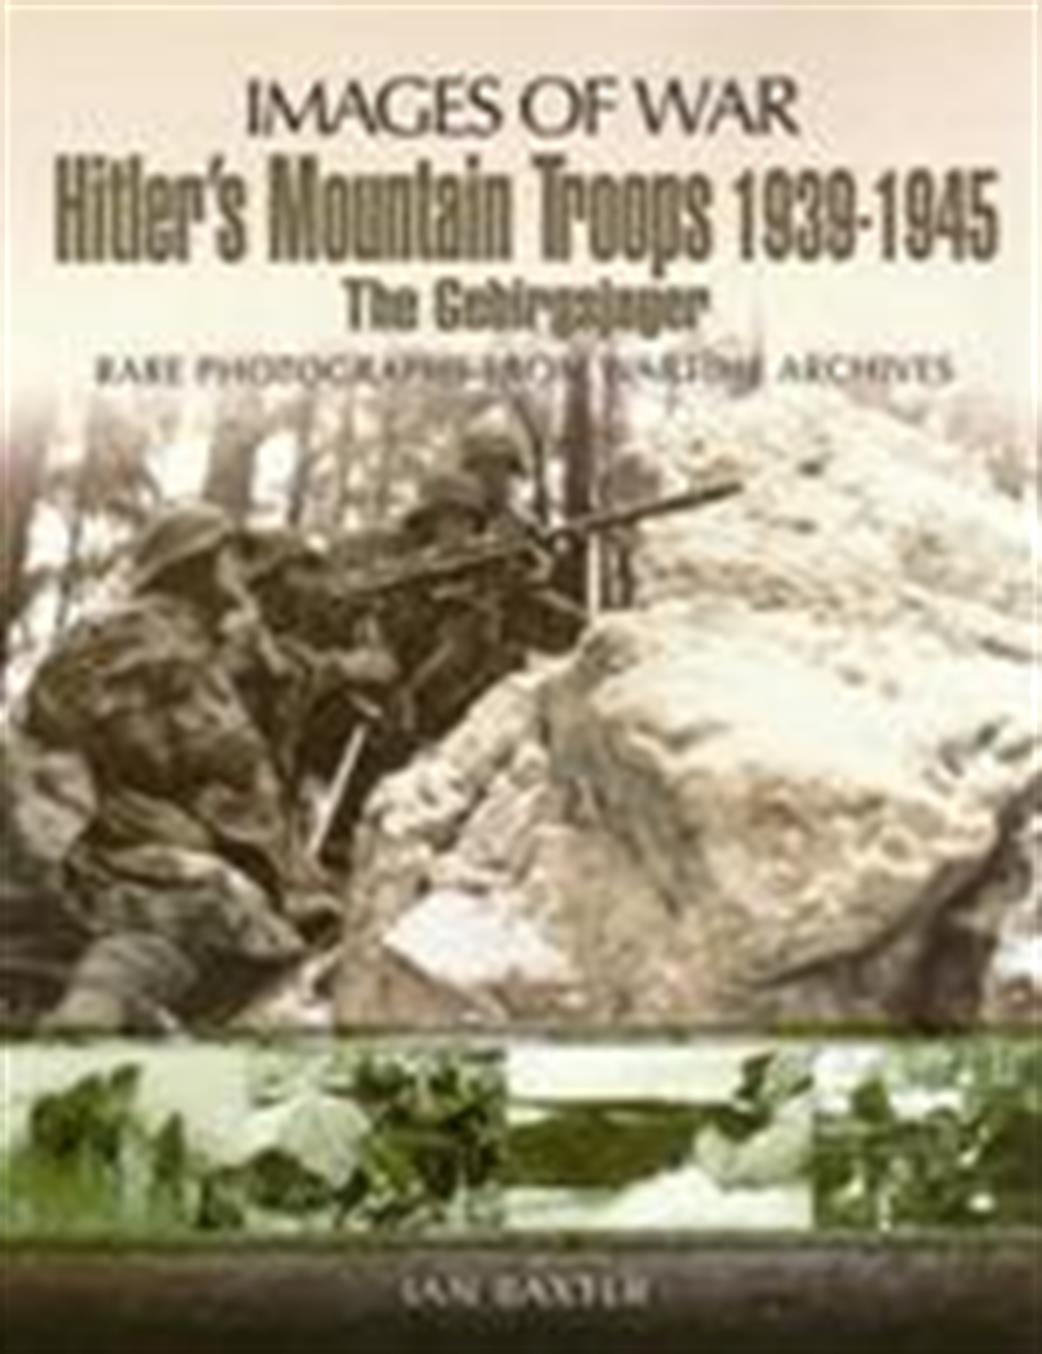 Pen & Sword  9781848843547 Images of War Hilter's Mountain Troops 1939 - 1945 The Gebirgsjager by Ian Baxter